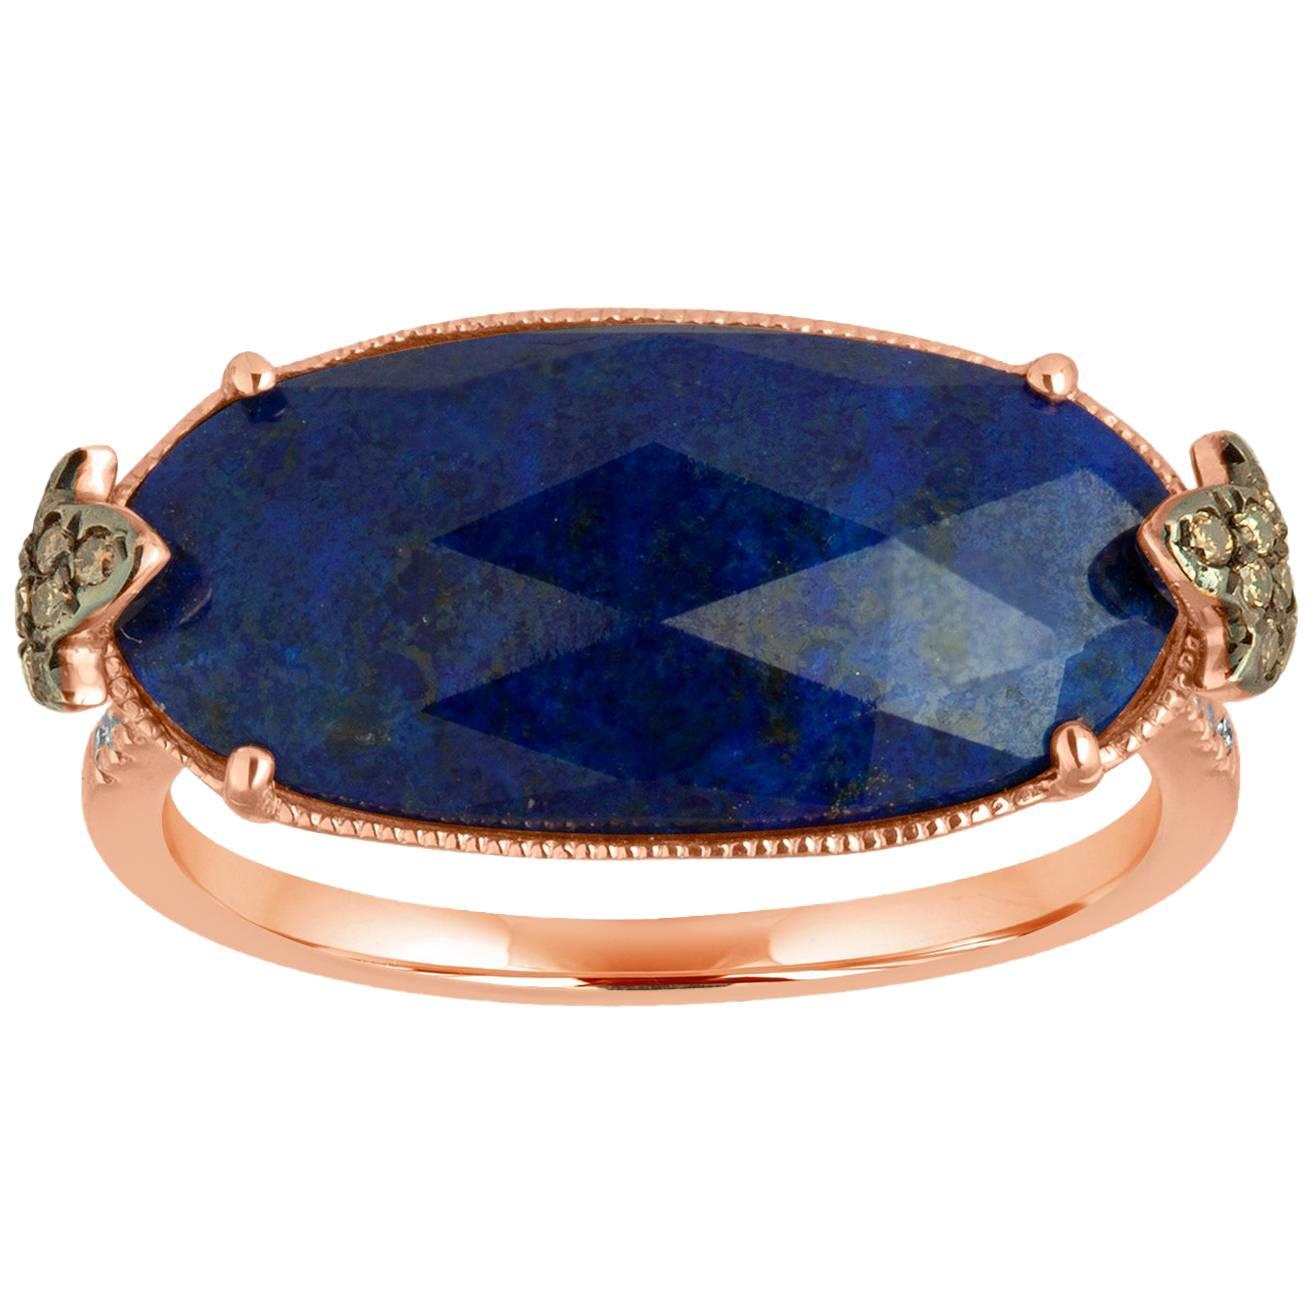 Lapis Lazuli 4.32 Carats Faceted Cabochon and Diamond Gold Ring